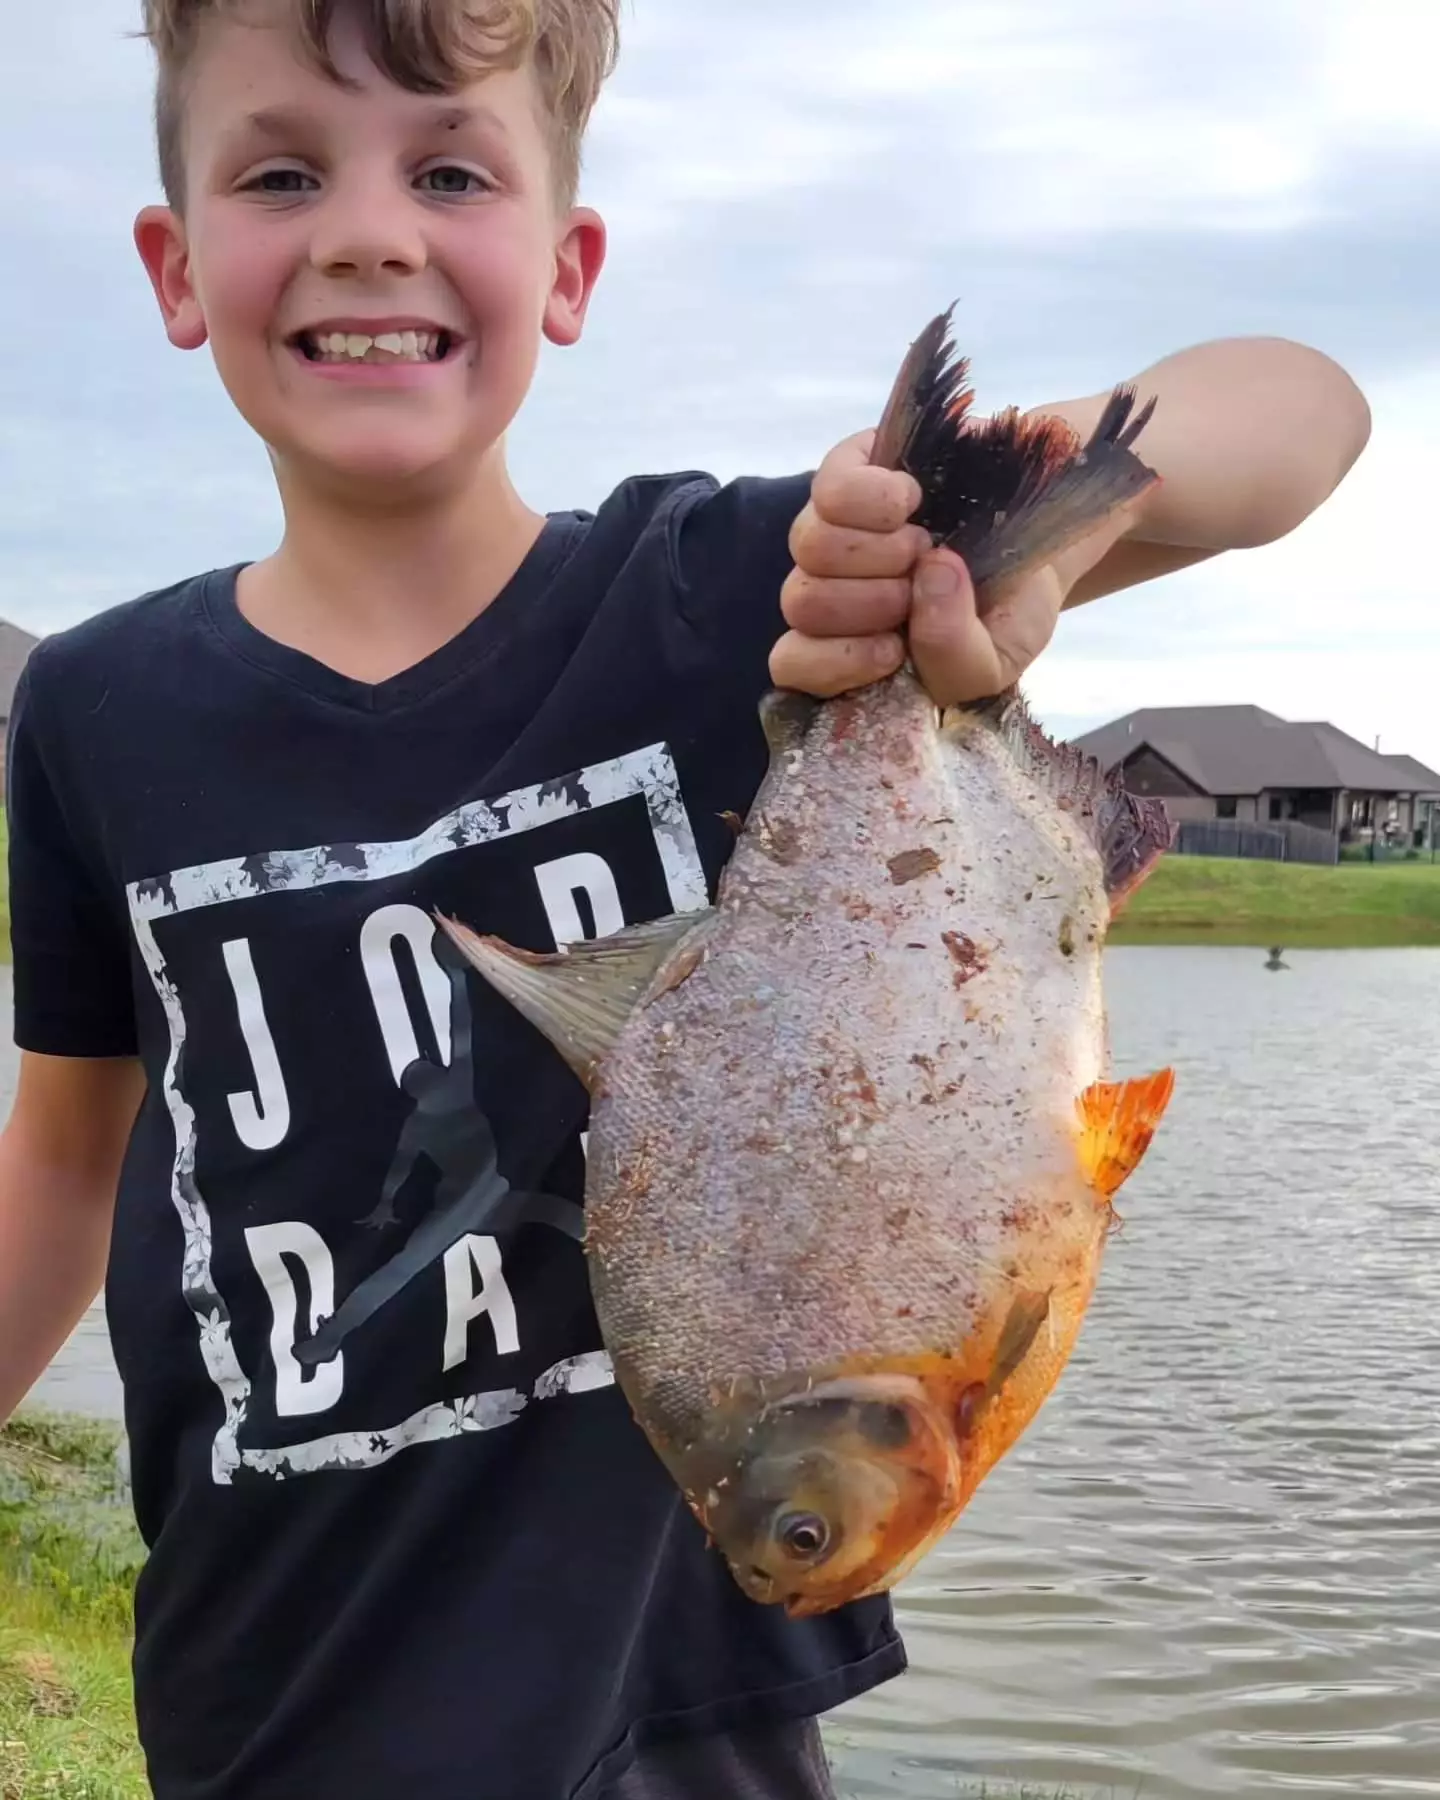 The fish was caught by 11-year-old Charlie Clinton.